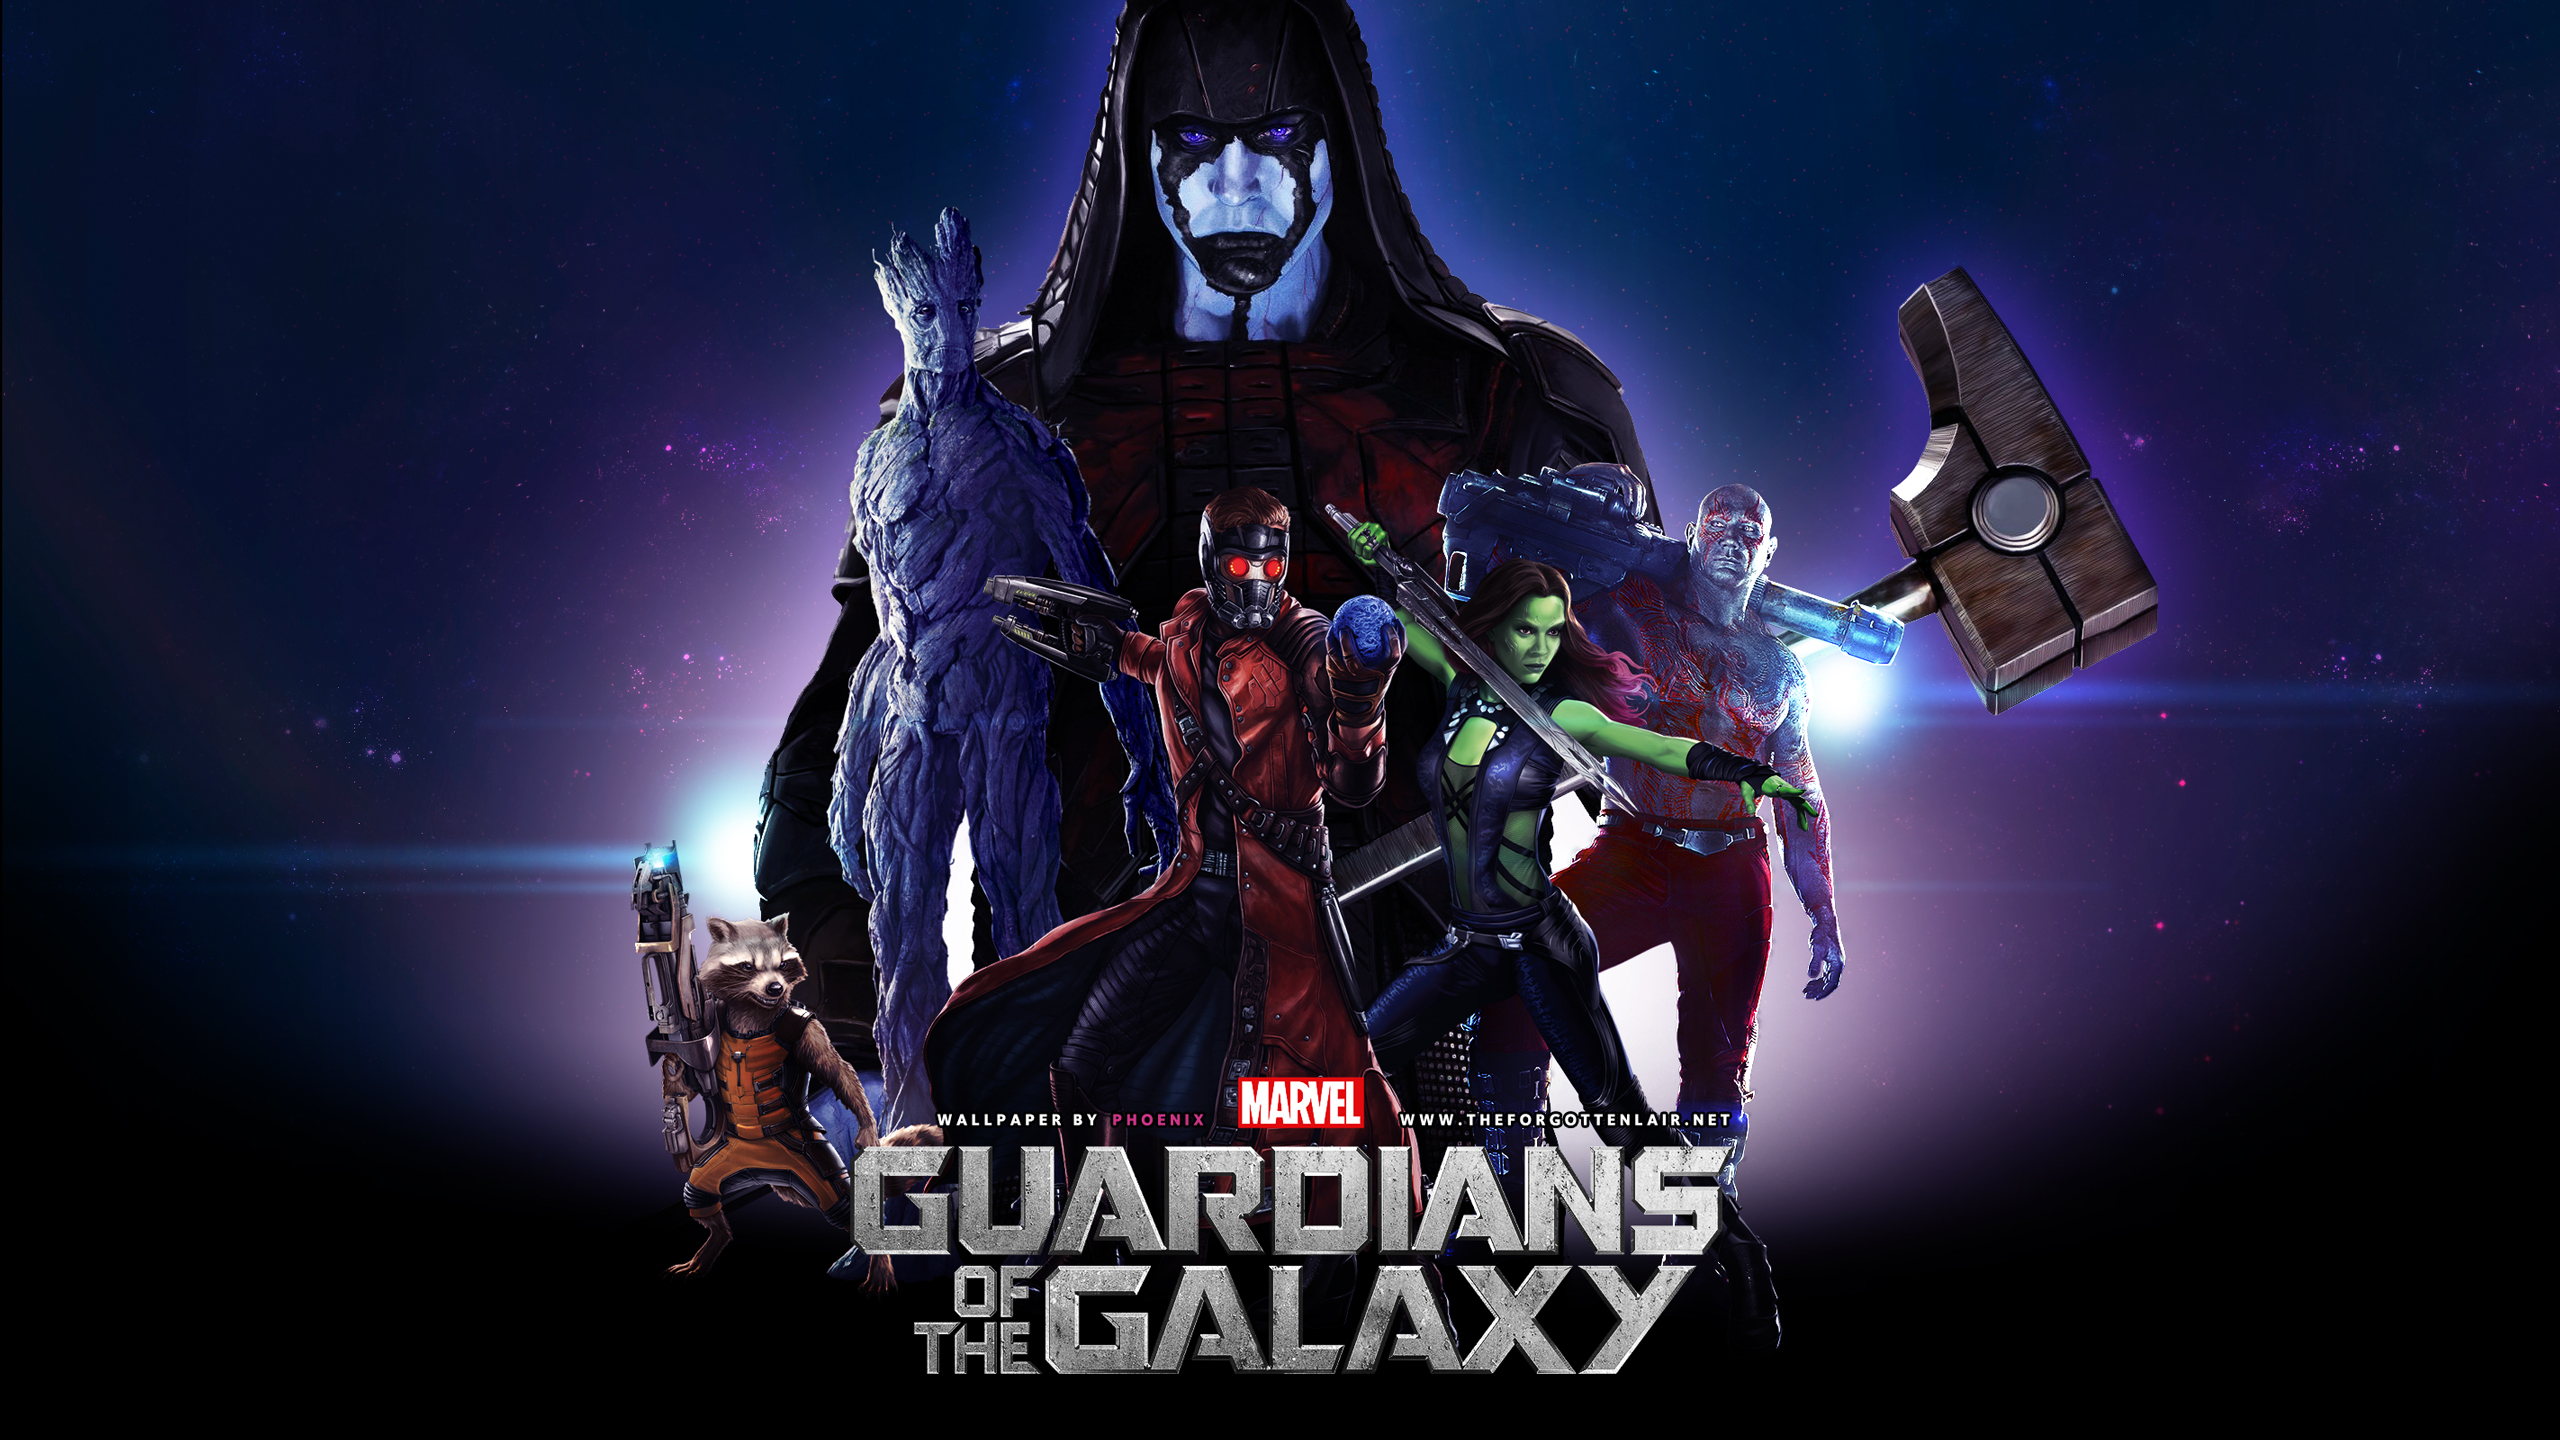 General 2560x1440 Marvel Comics Guardians of the Galaxy Gamora  Drax the Destroyer Star-Lord Groot Rocket Raccoon Ronan movies movie poster Marvel Cinematic Universe science fiction